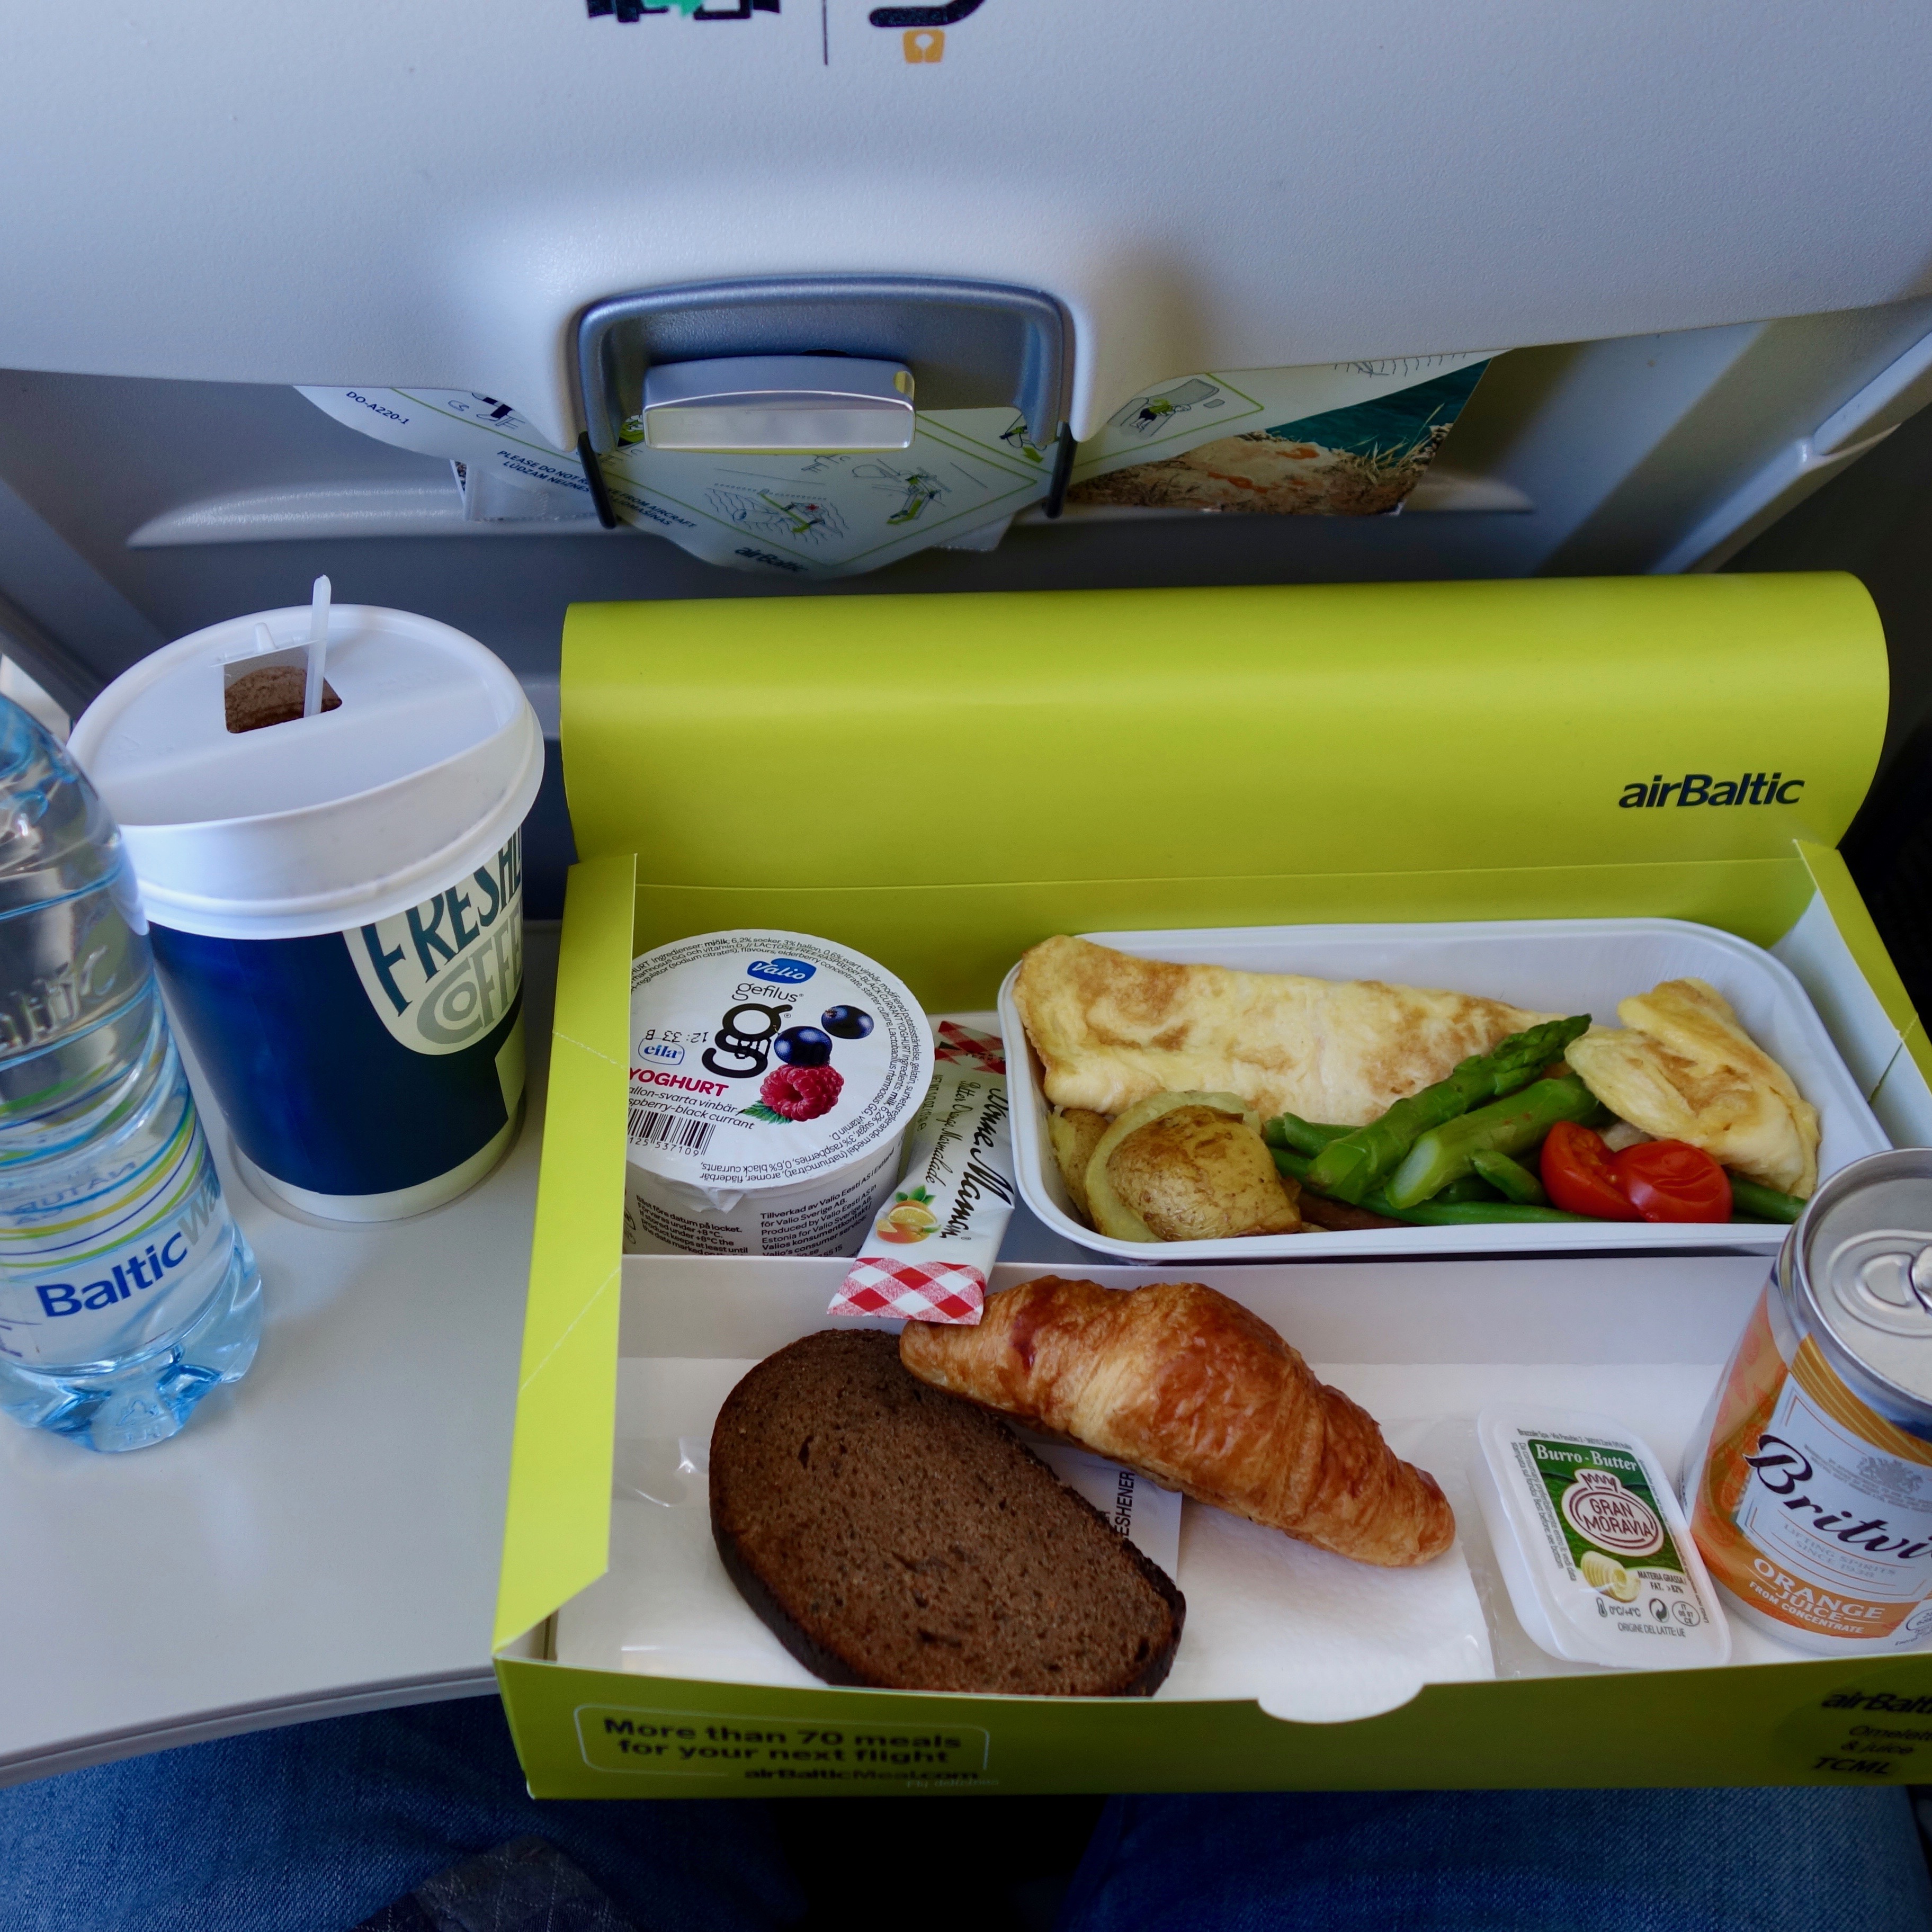 This review of the experience on an airBaltic Airbus A220 also includes focus on the inflight meal served for purchase.  This kit contains an omelette, croissant and beverages.  